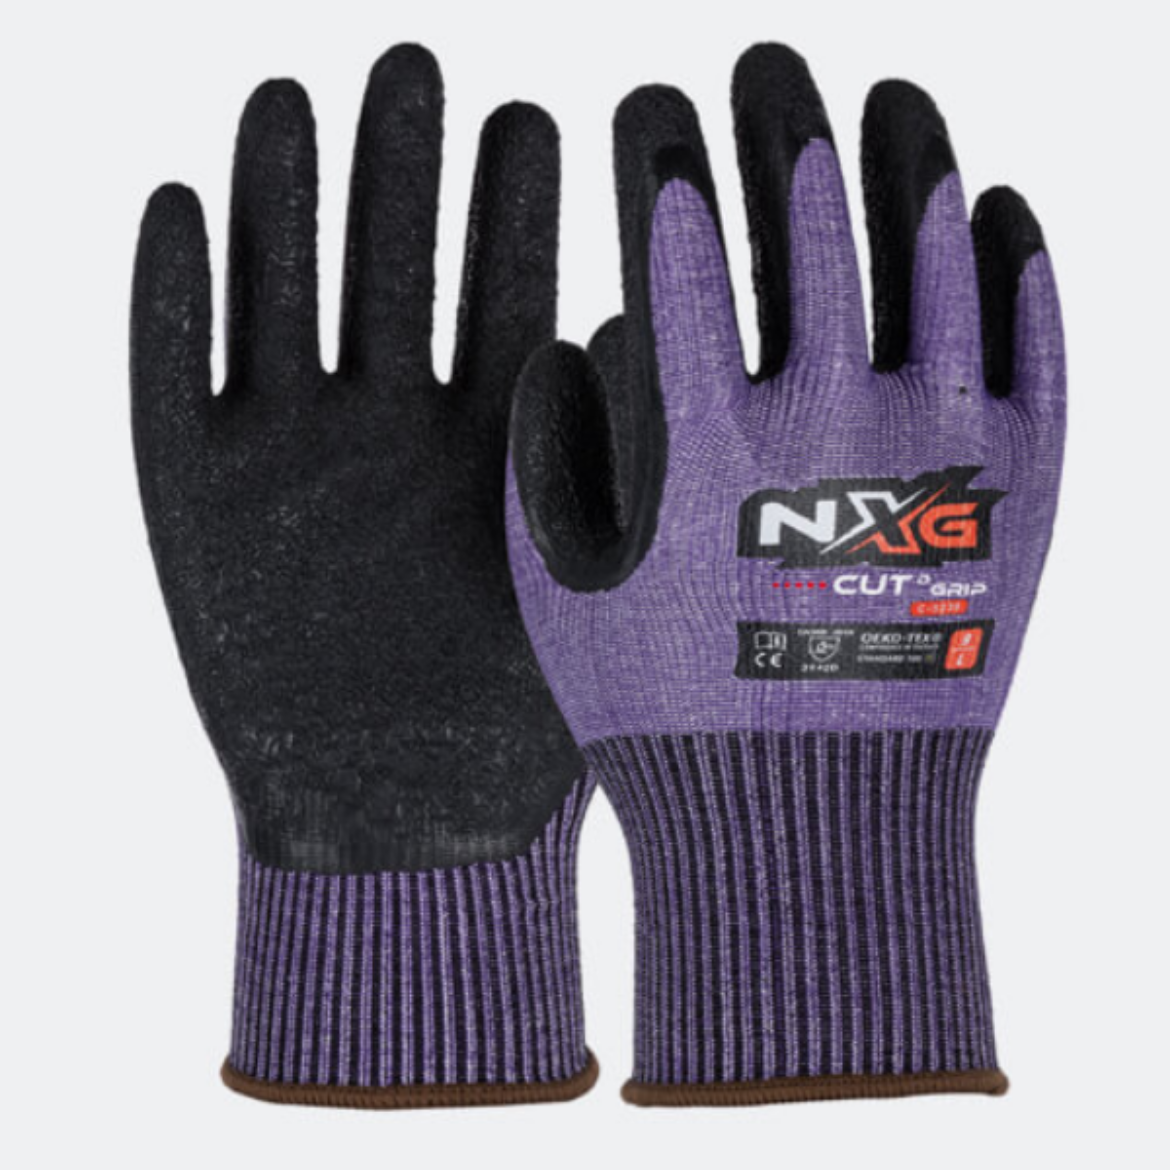 Picture of GLOVES, NXG CUT D GRIP, PURPLE LATEX. AVAILABLE IN SIZES 7 - 12